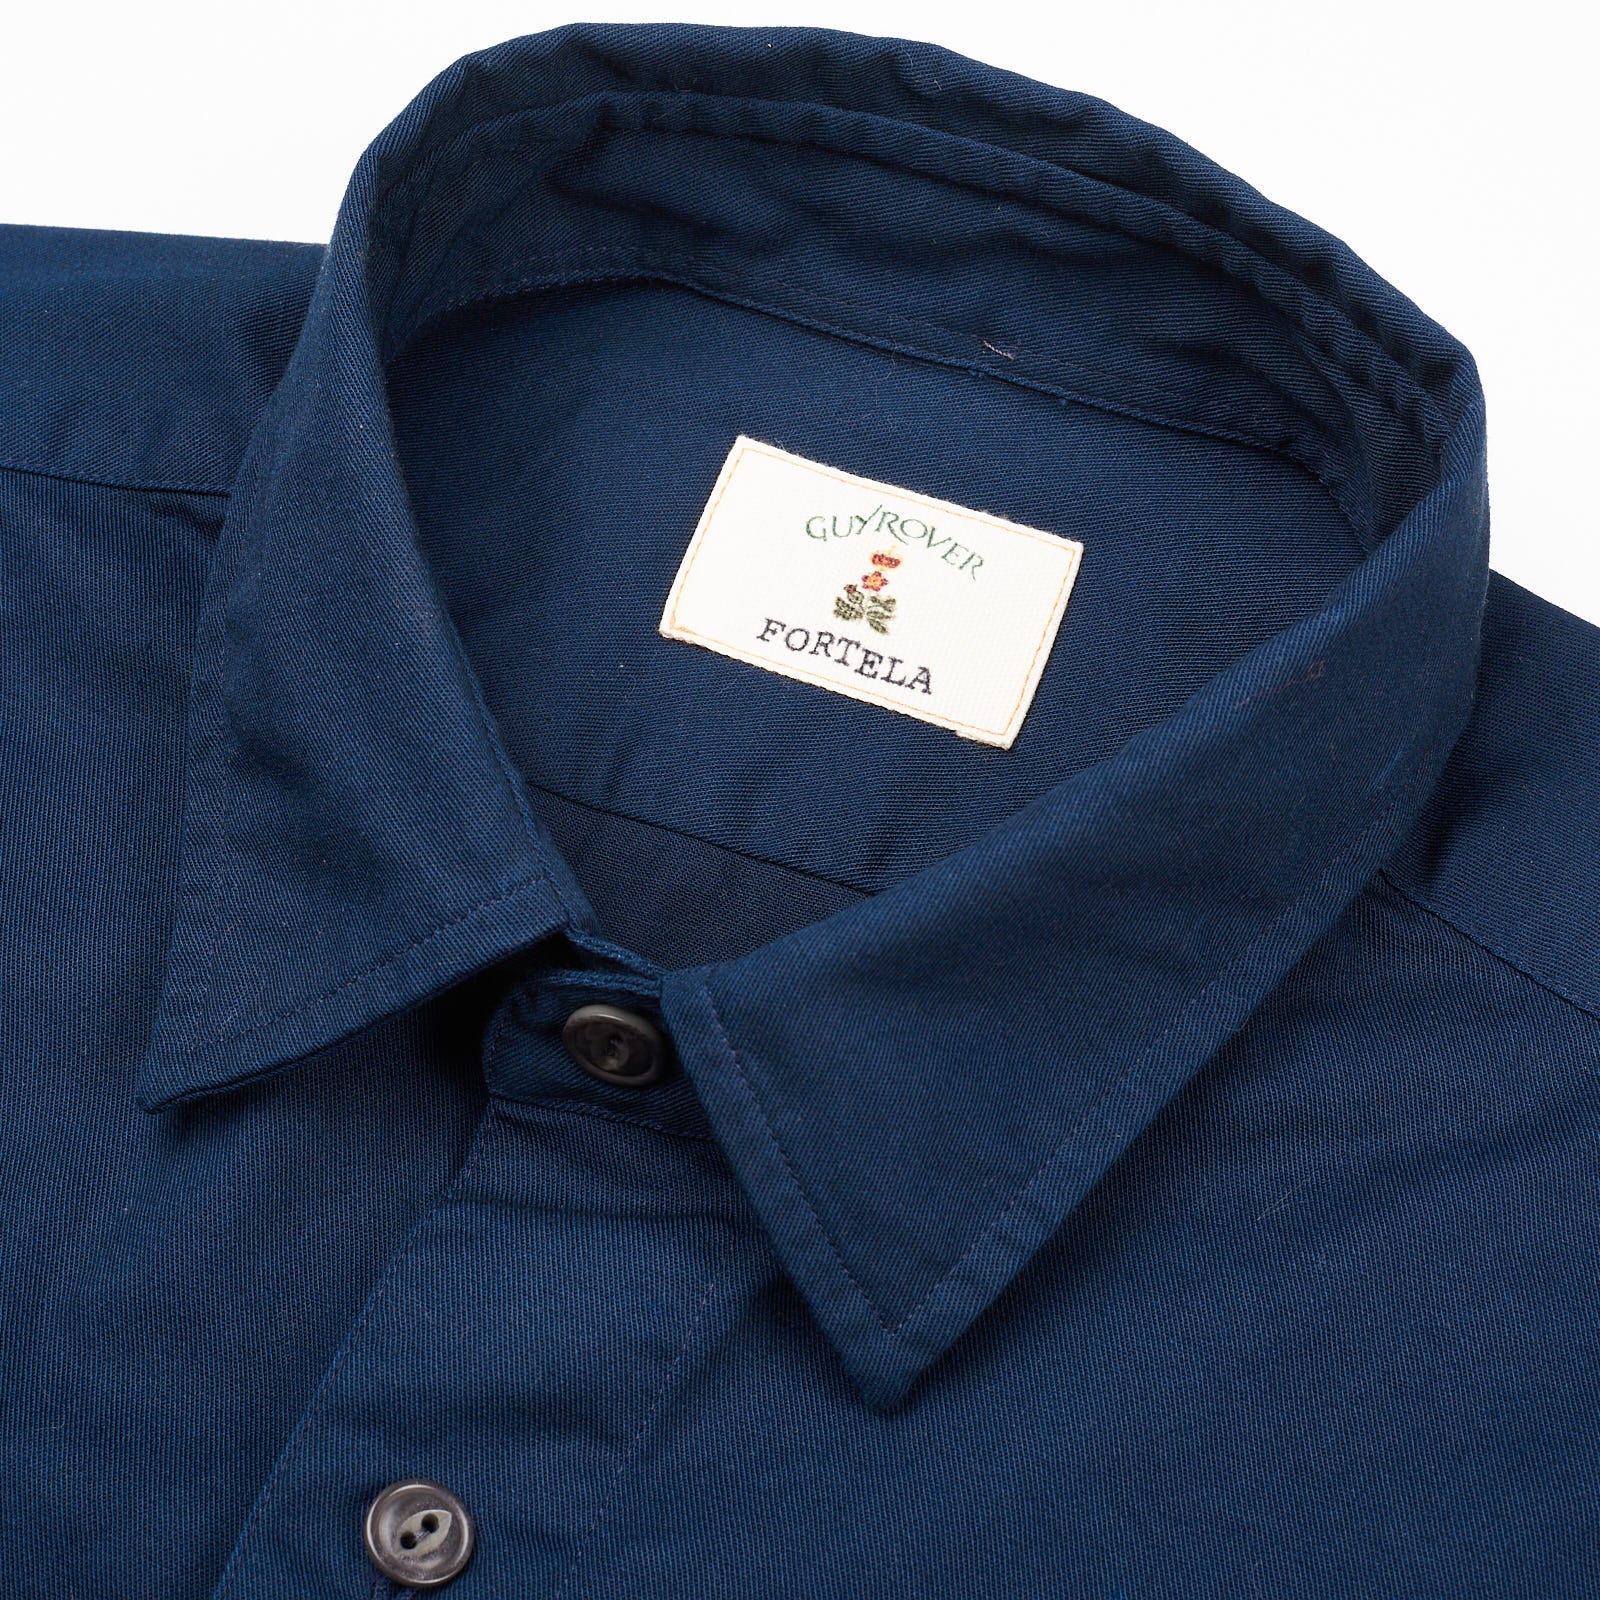 GUY ROVER X FORTELA "Marine" Blue Twill Cotton Casual Overshirt Shirt NEW Size L GUY ROVER X FORTELA